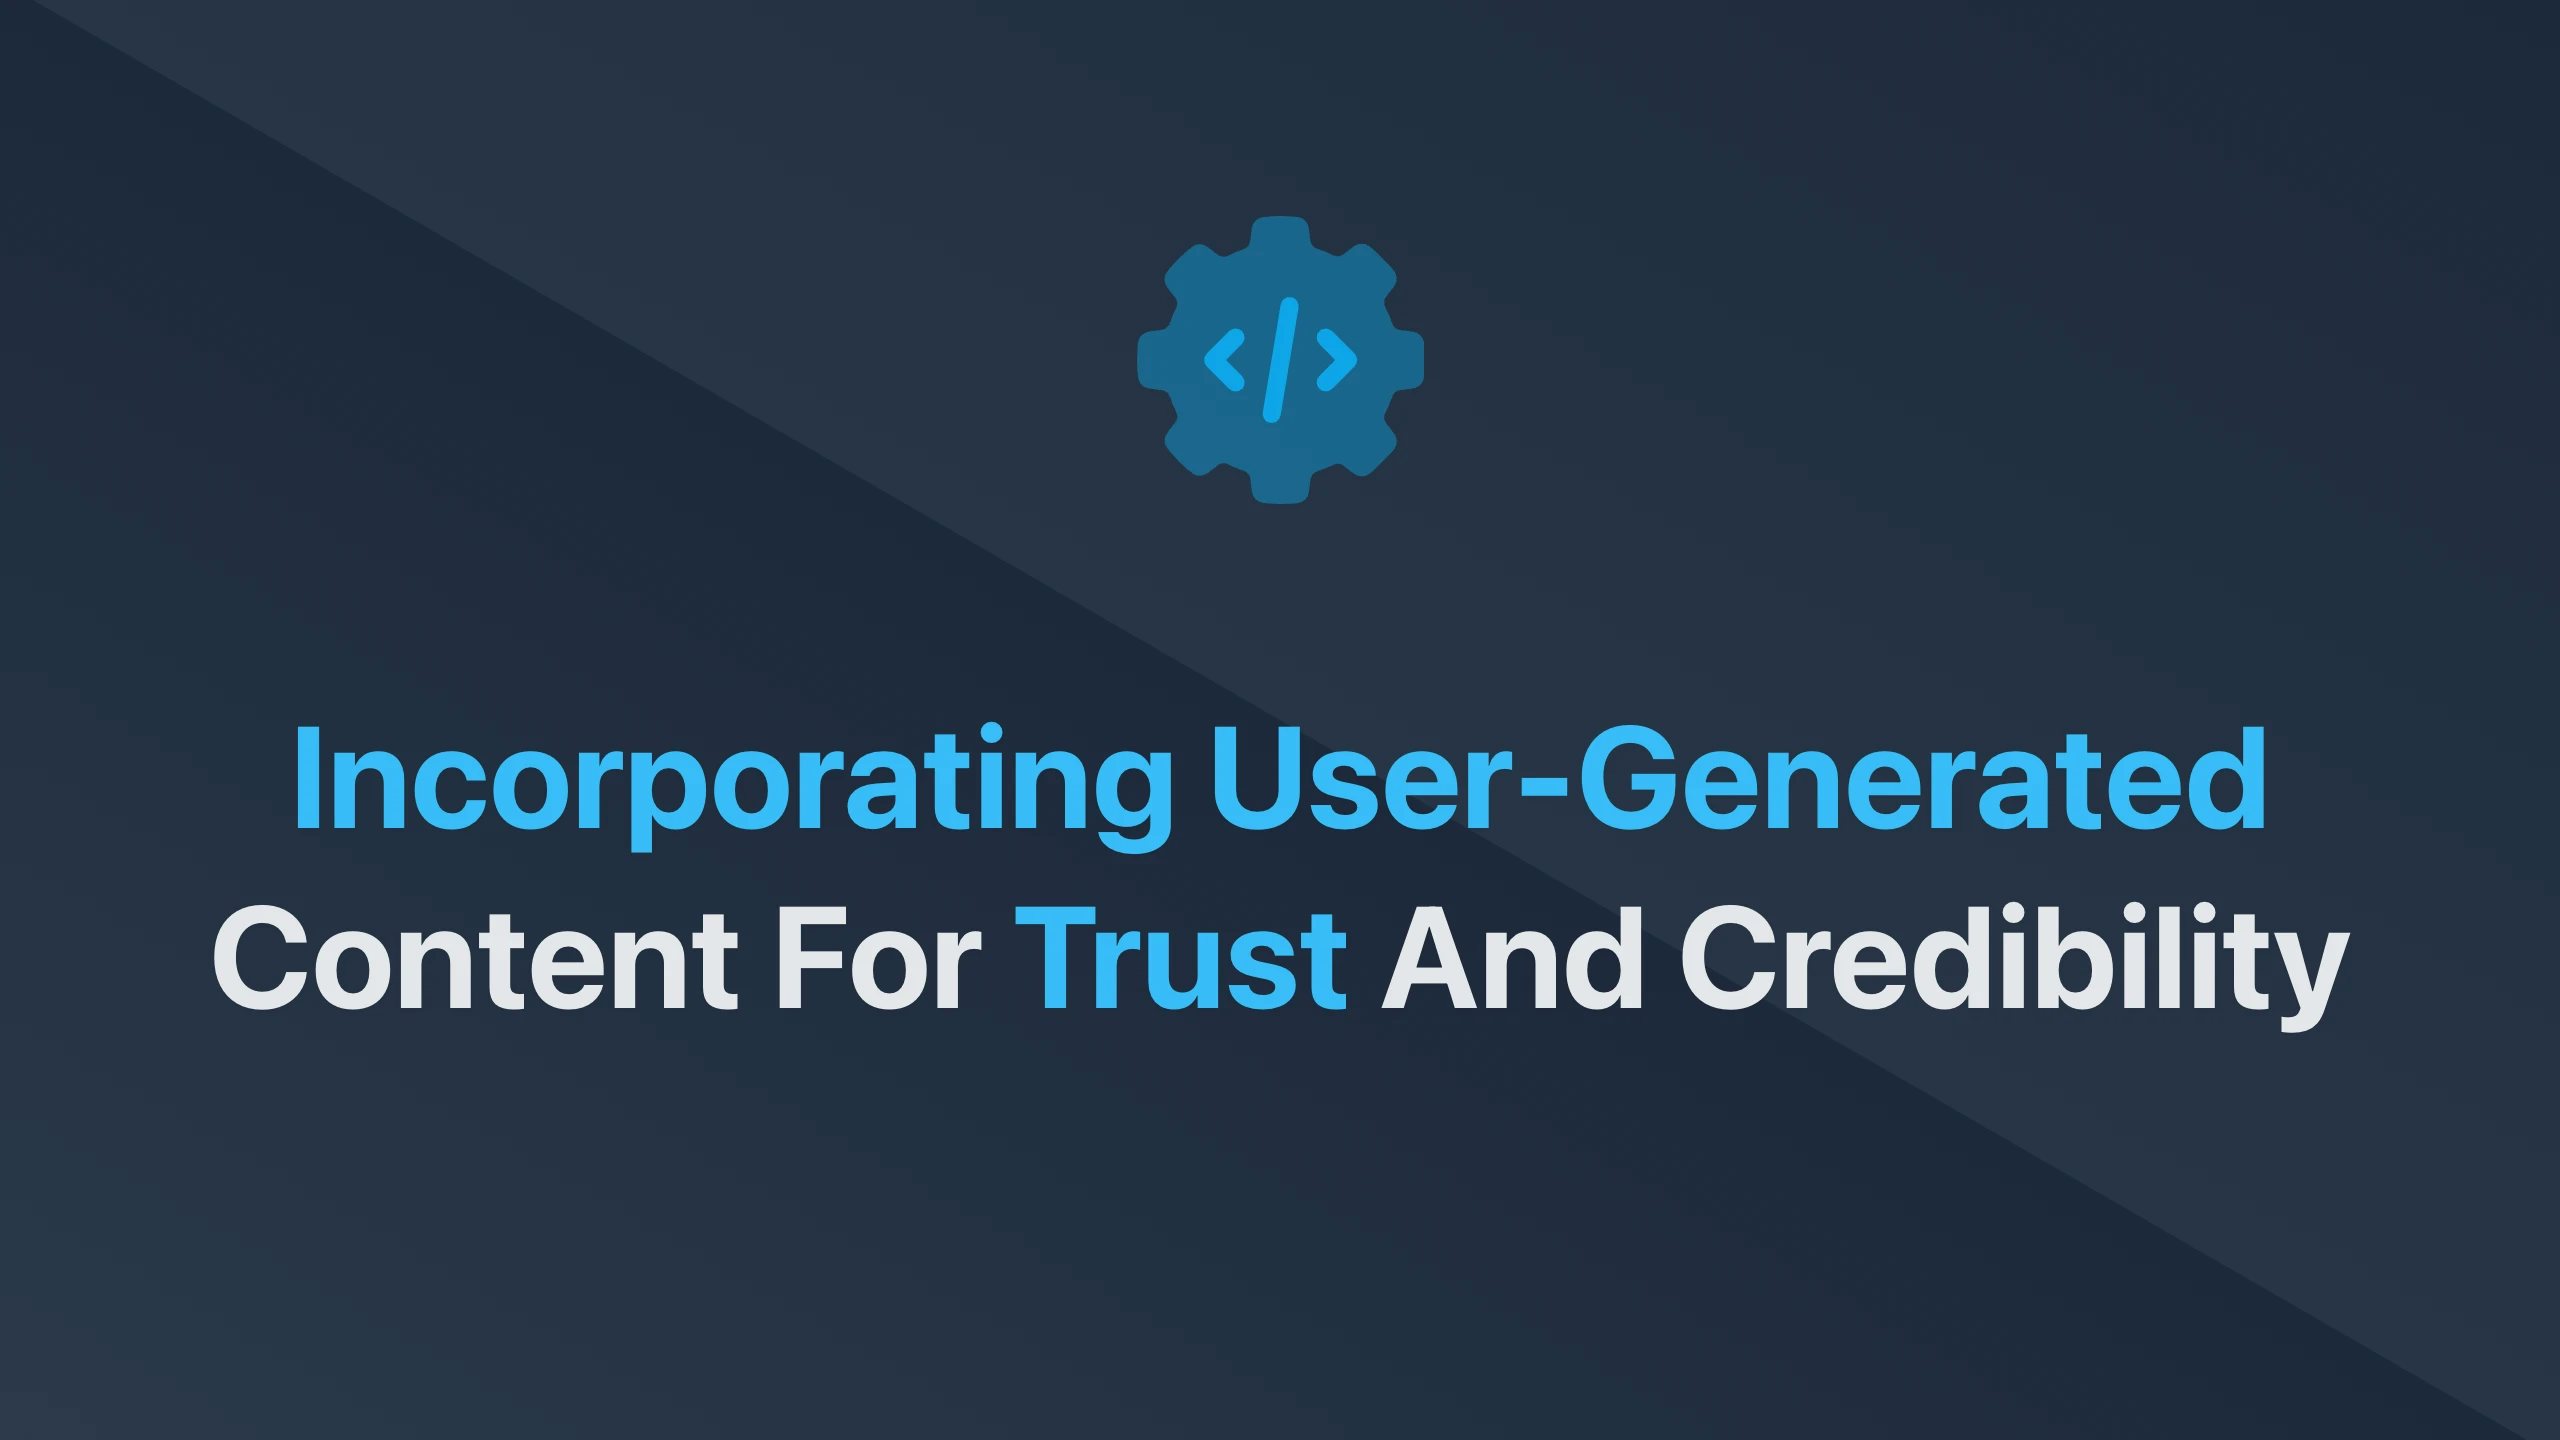 Cover Image for Incorporating User-Generated Content for Trust and Credibility